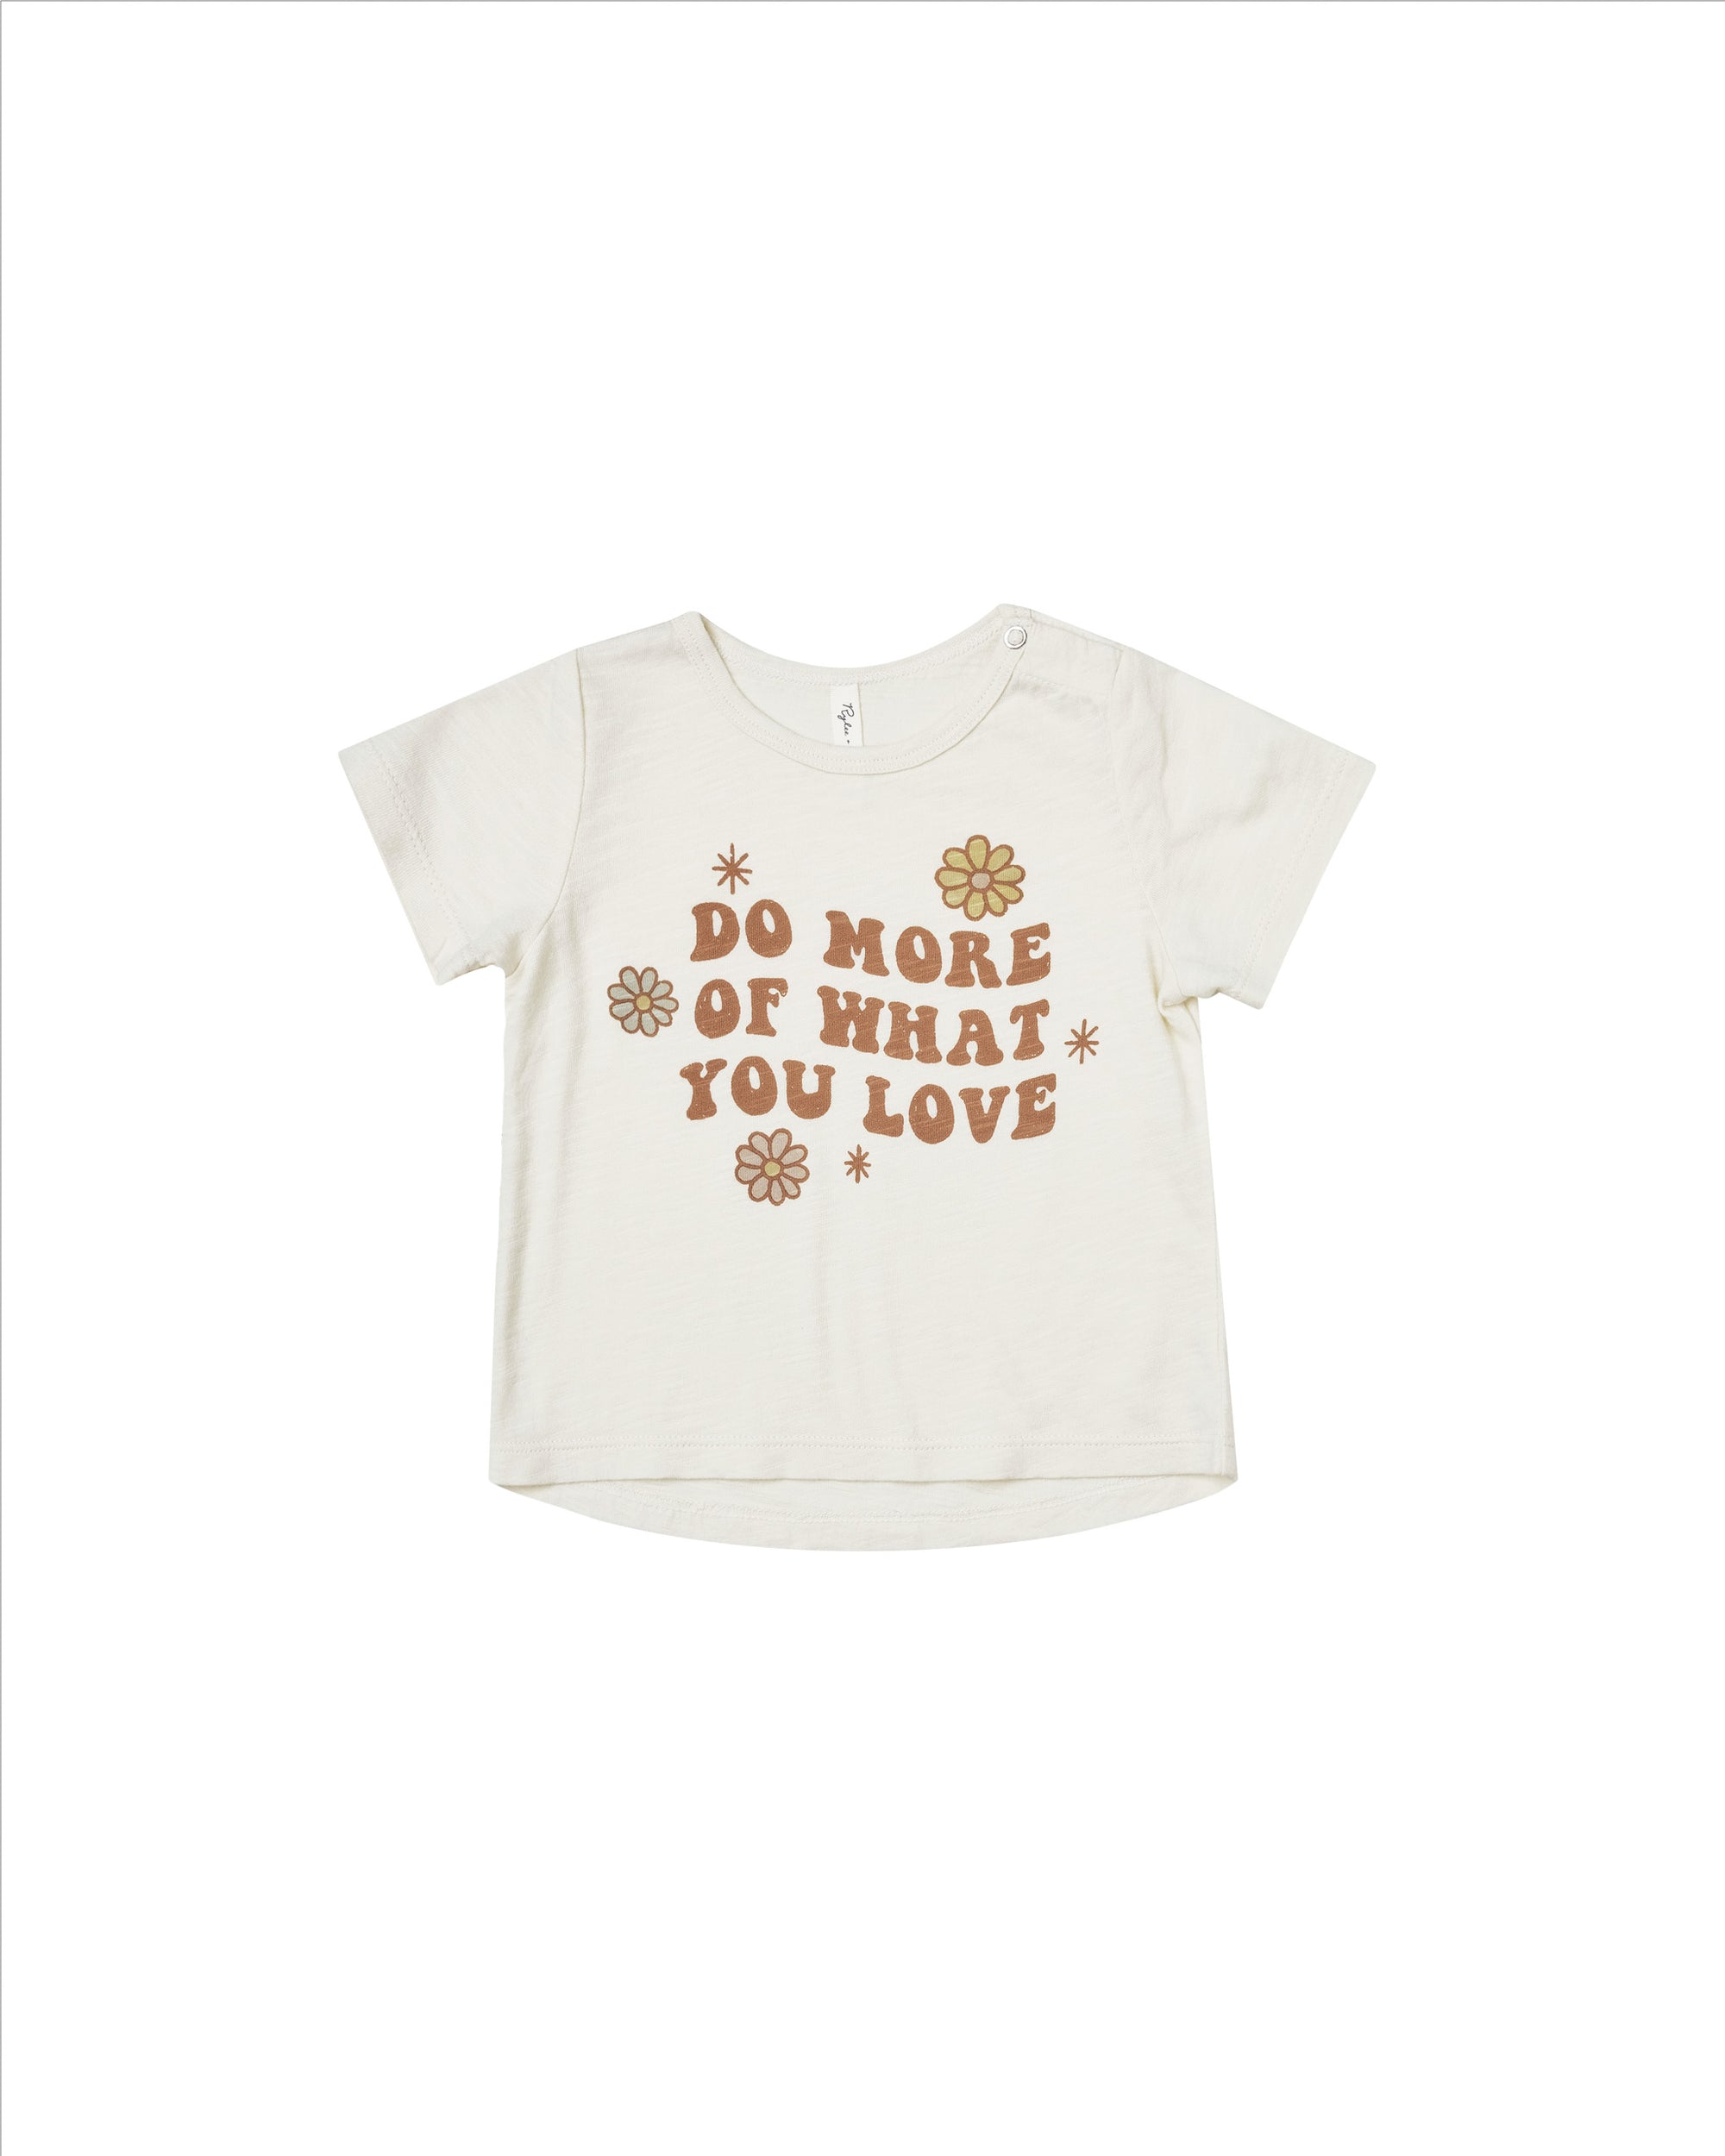 girls graphic tee in ivory color